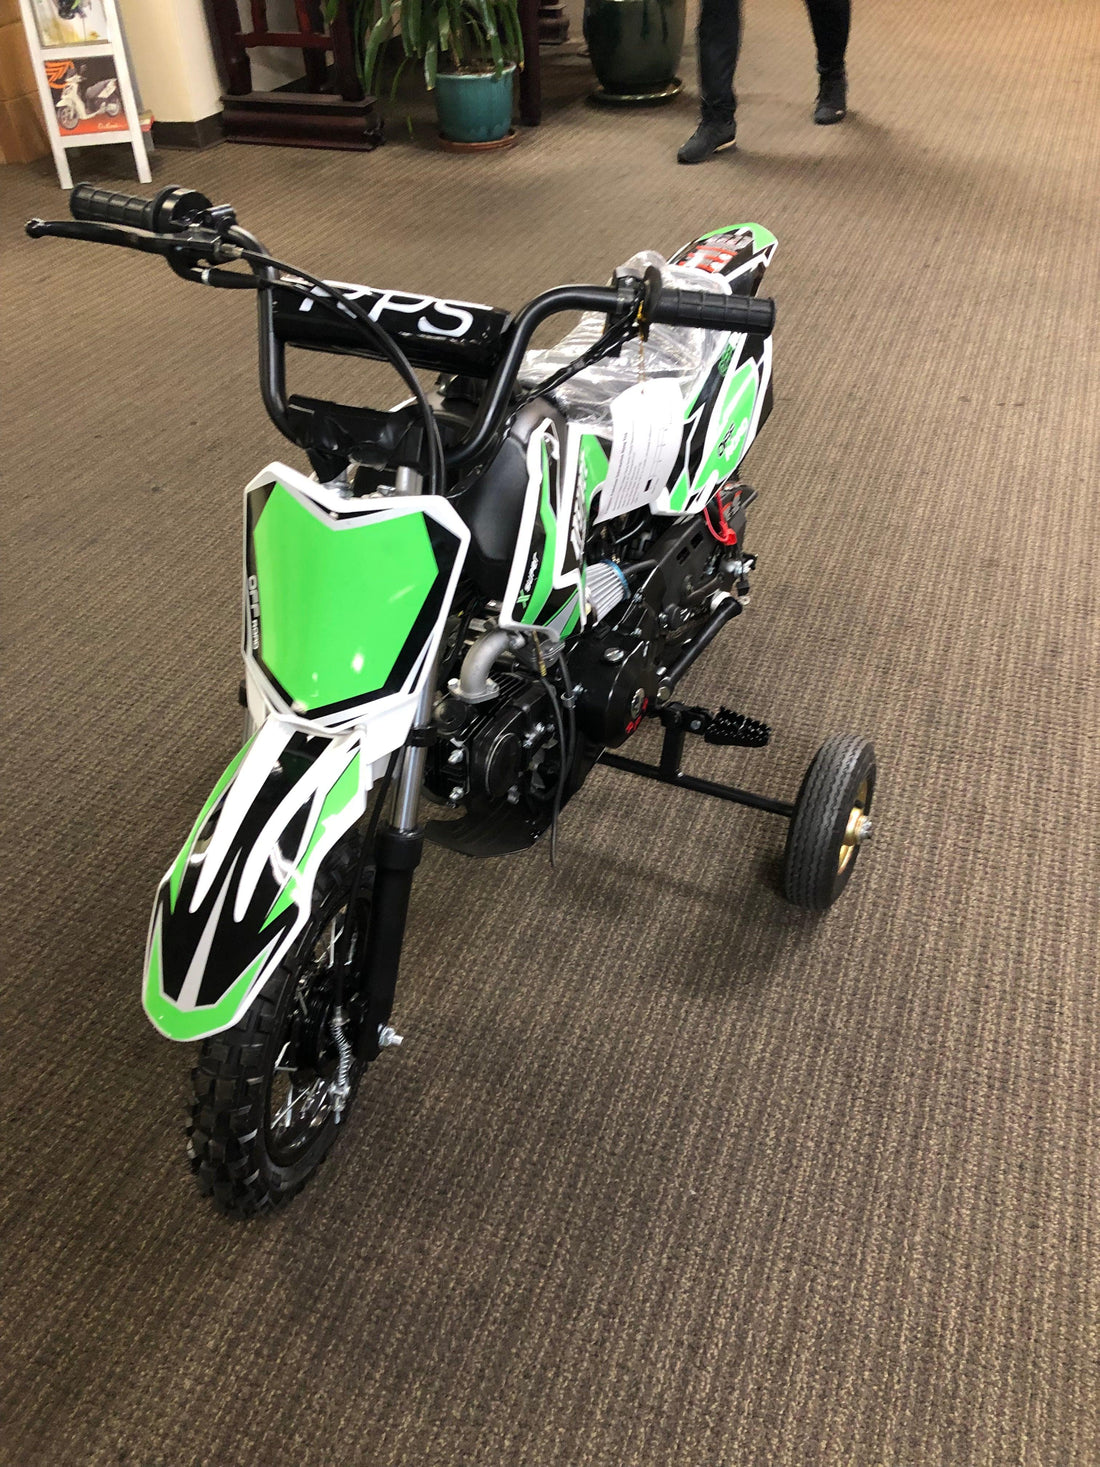 Gas Powered Beginners 70cc Dirt Bike for Kids ages 7 and up